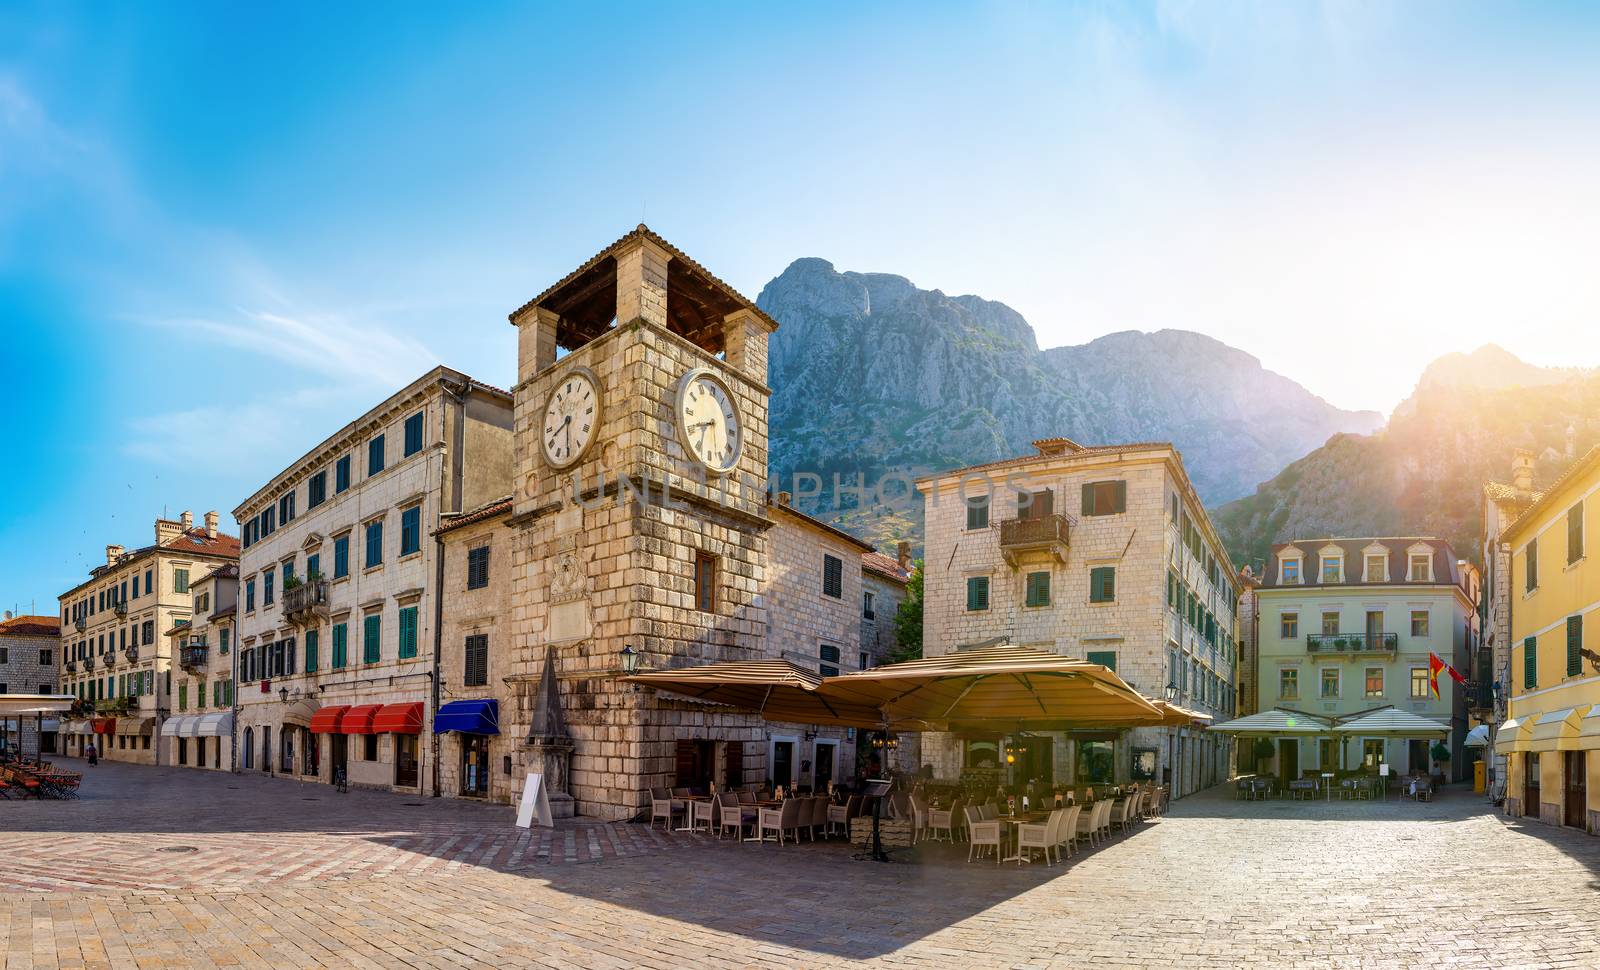 Clock Tower in Kotor by Givaga